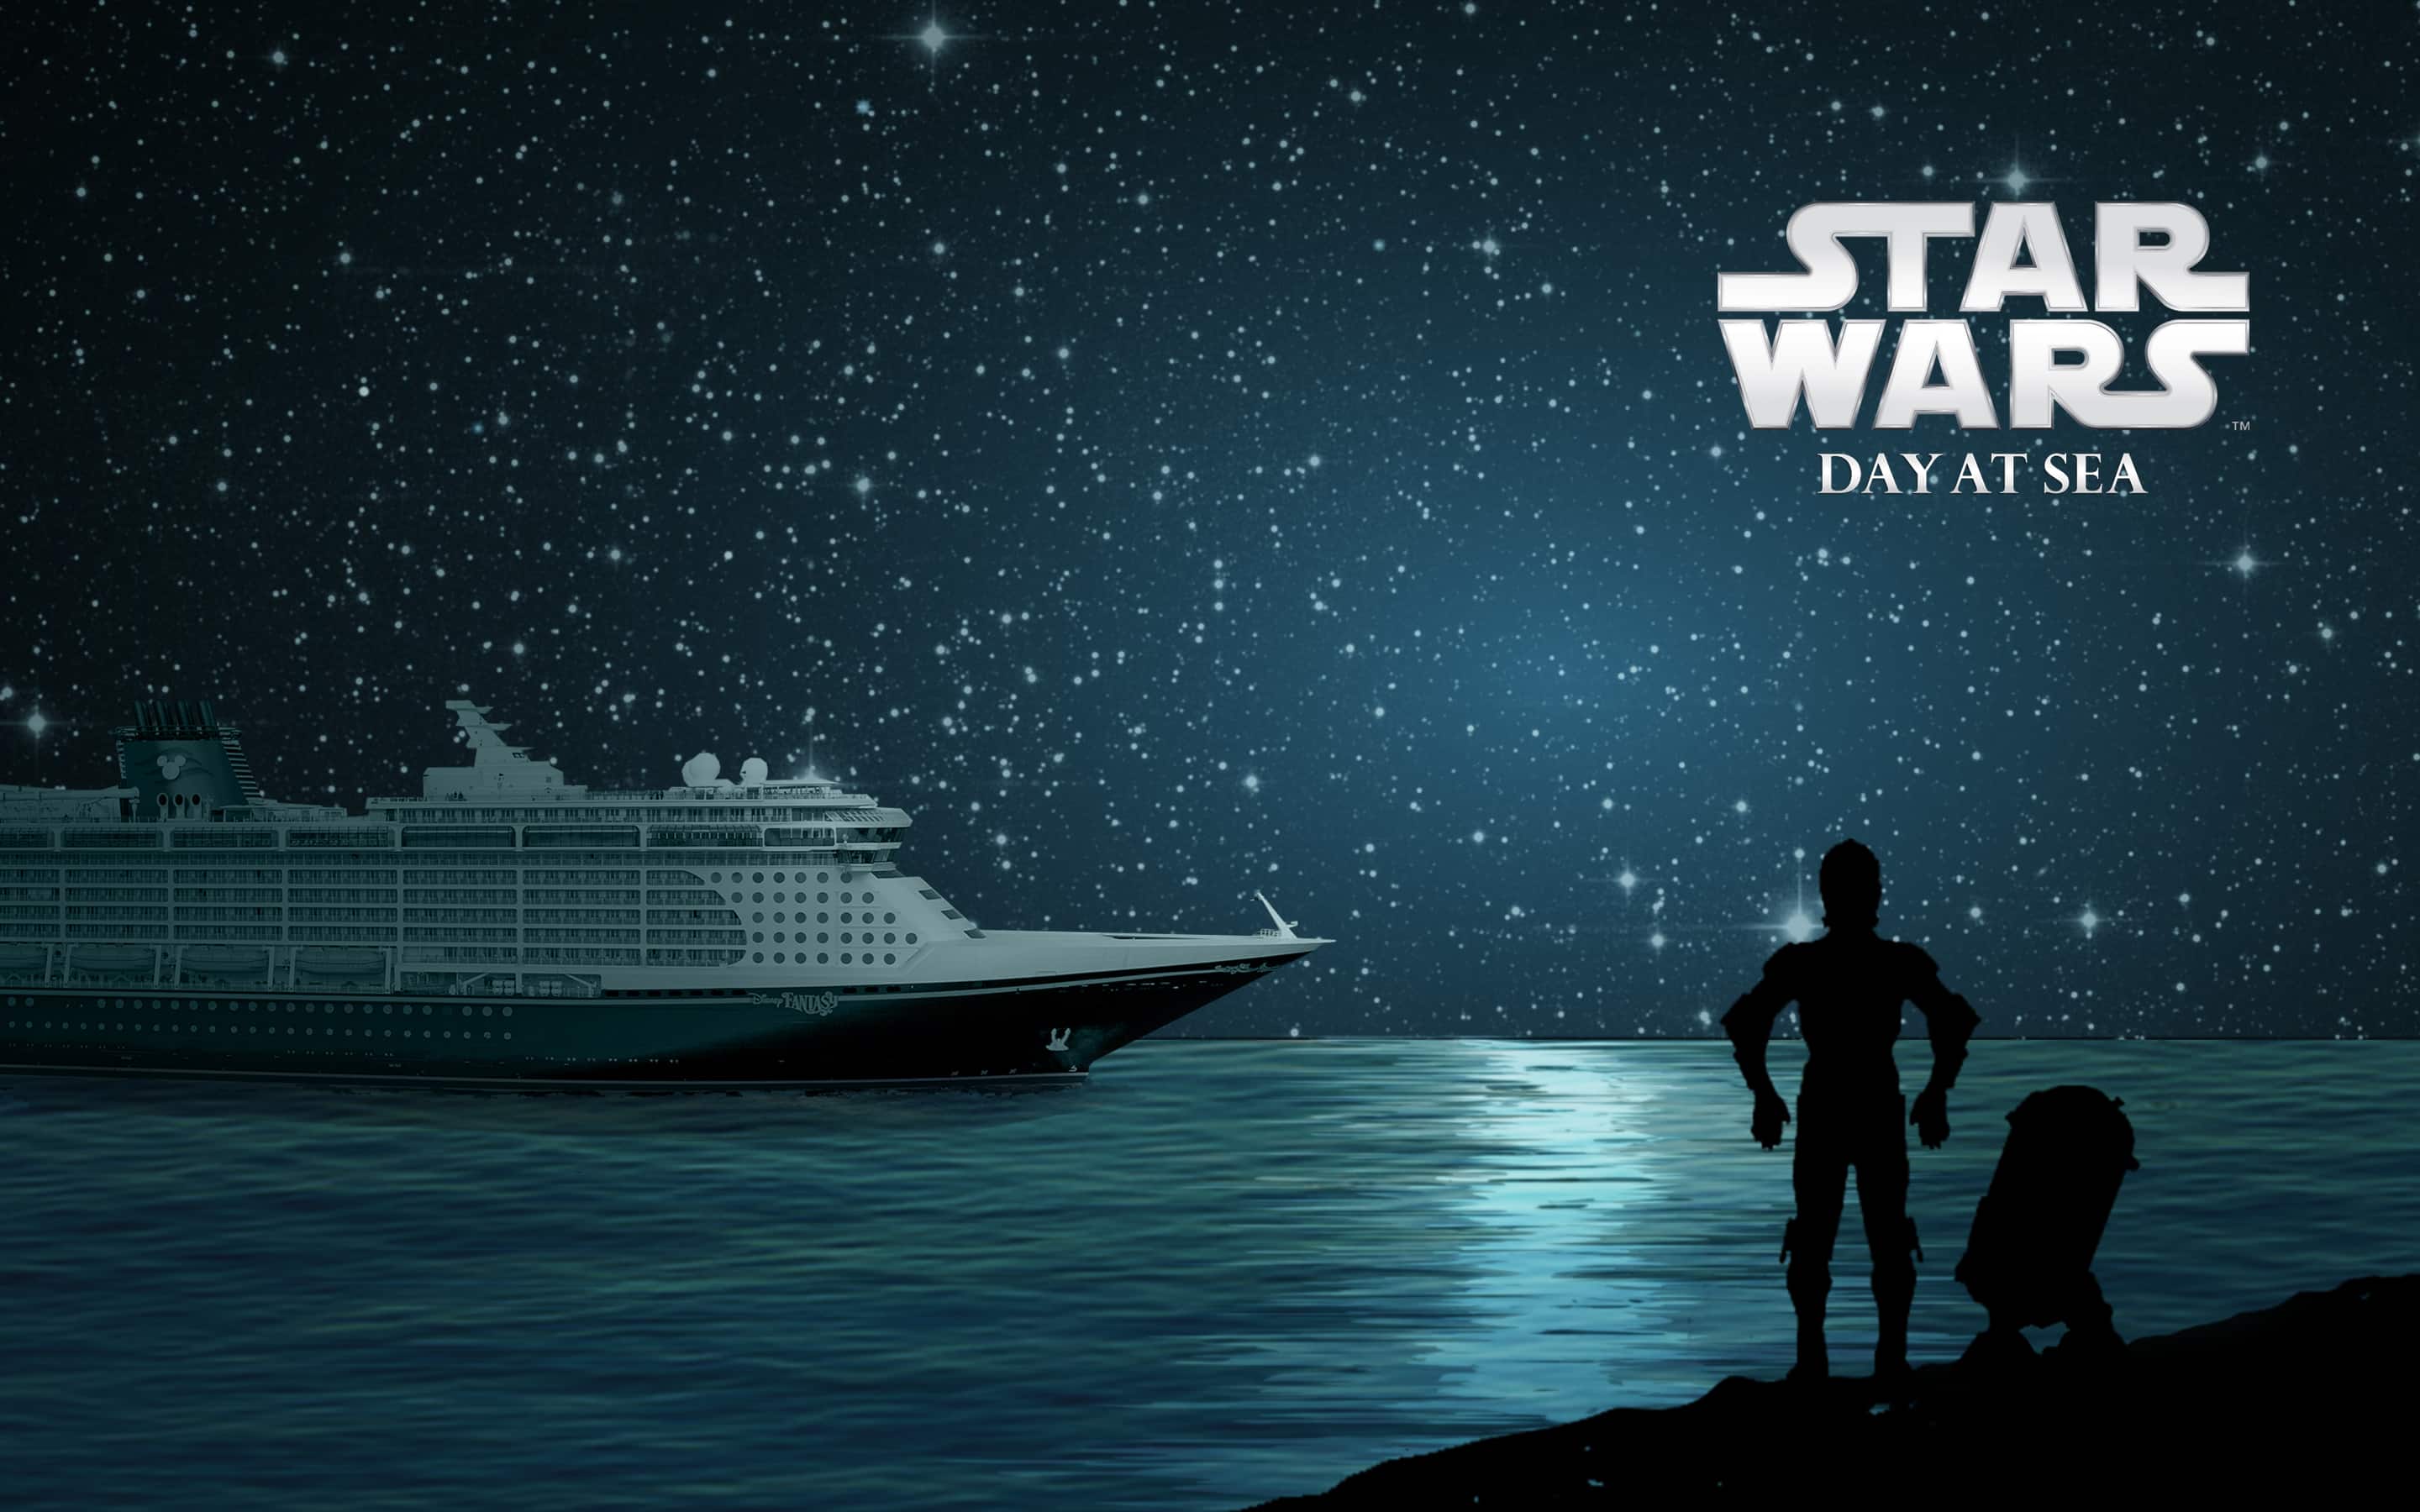 2020 Star Wars Day at Sea Digital Wallpapers The Disney Cruise